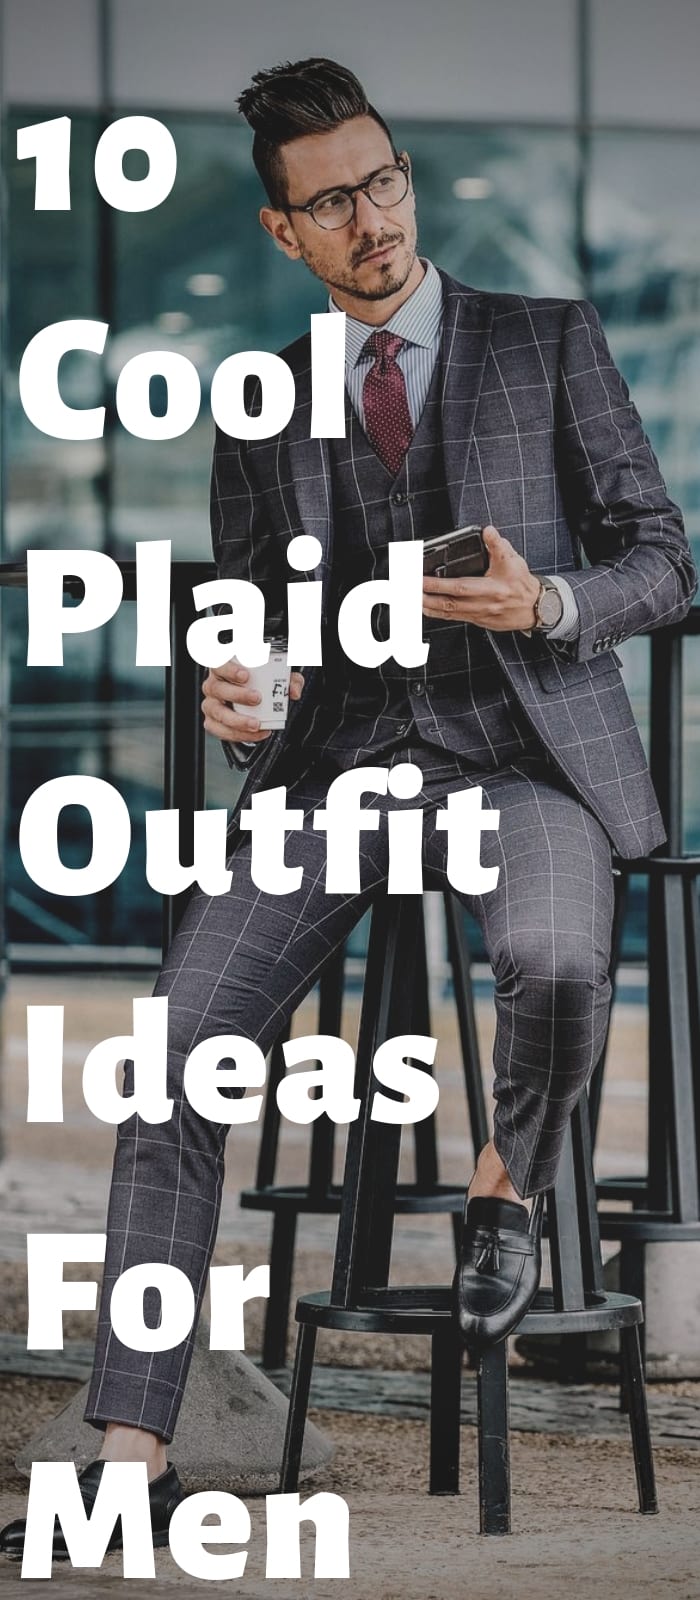 10 Cool Plaid Outfit Ideas For Men!